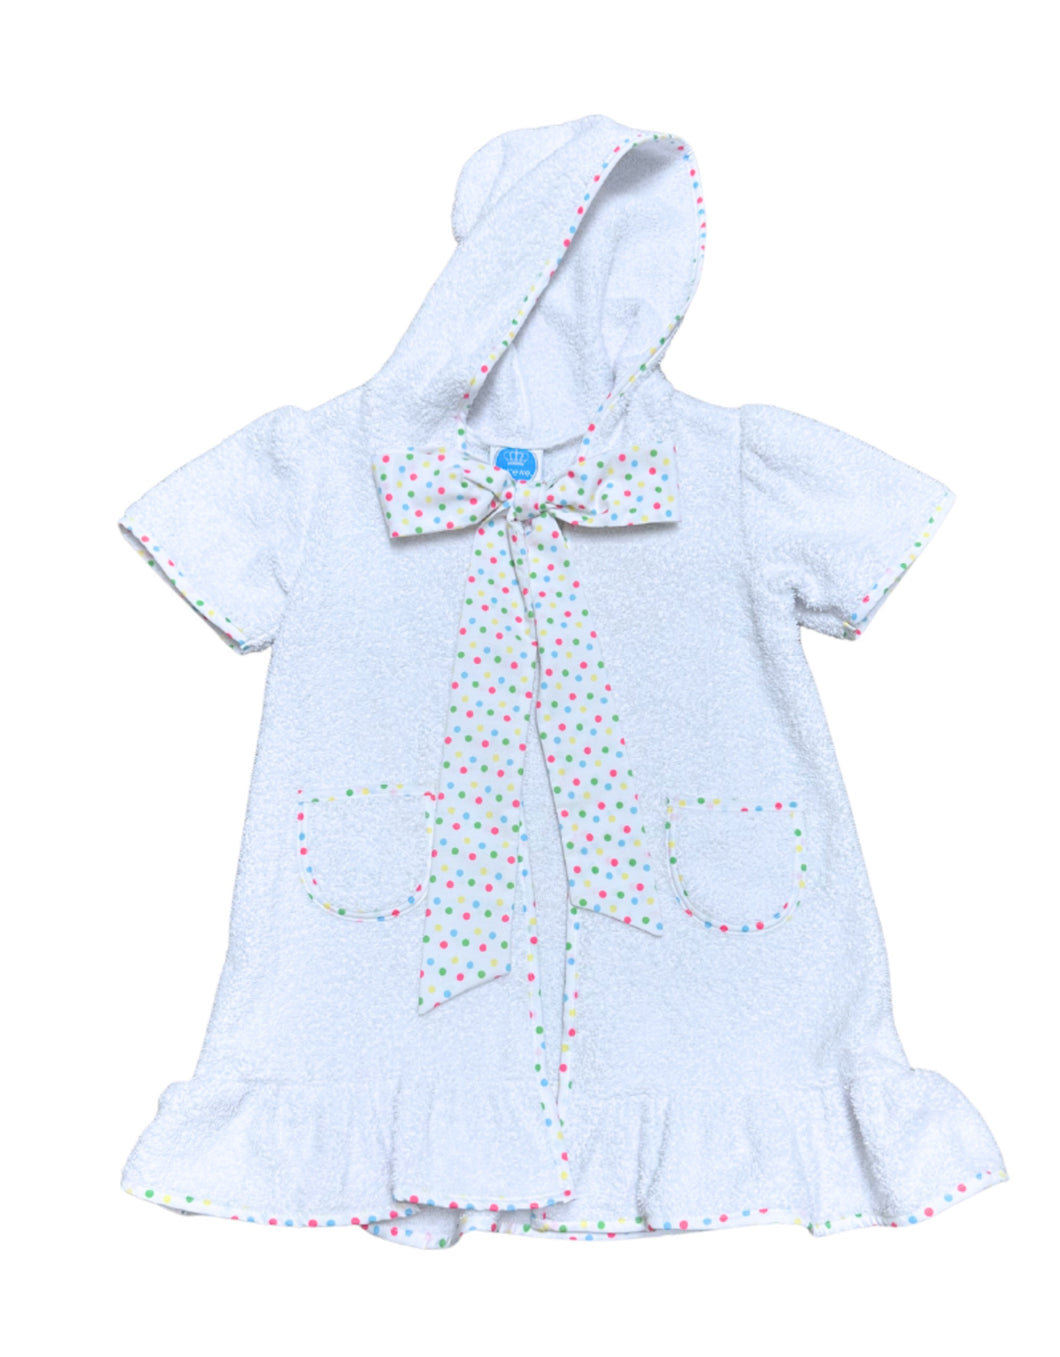 Hooded Terry Cloth Cover Up with Colorful Polka Dot Bow